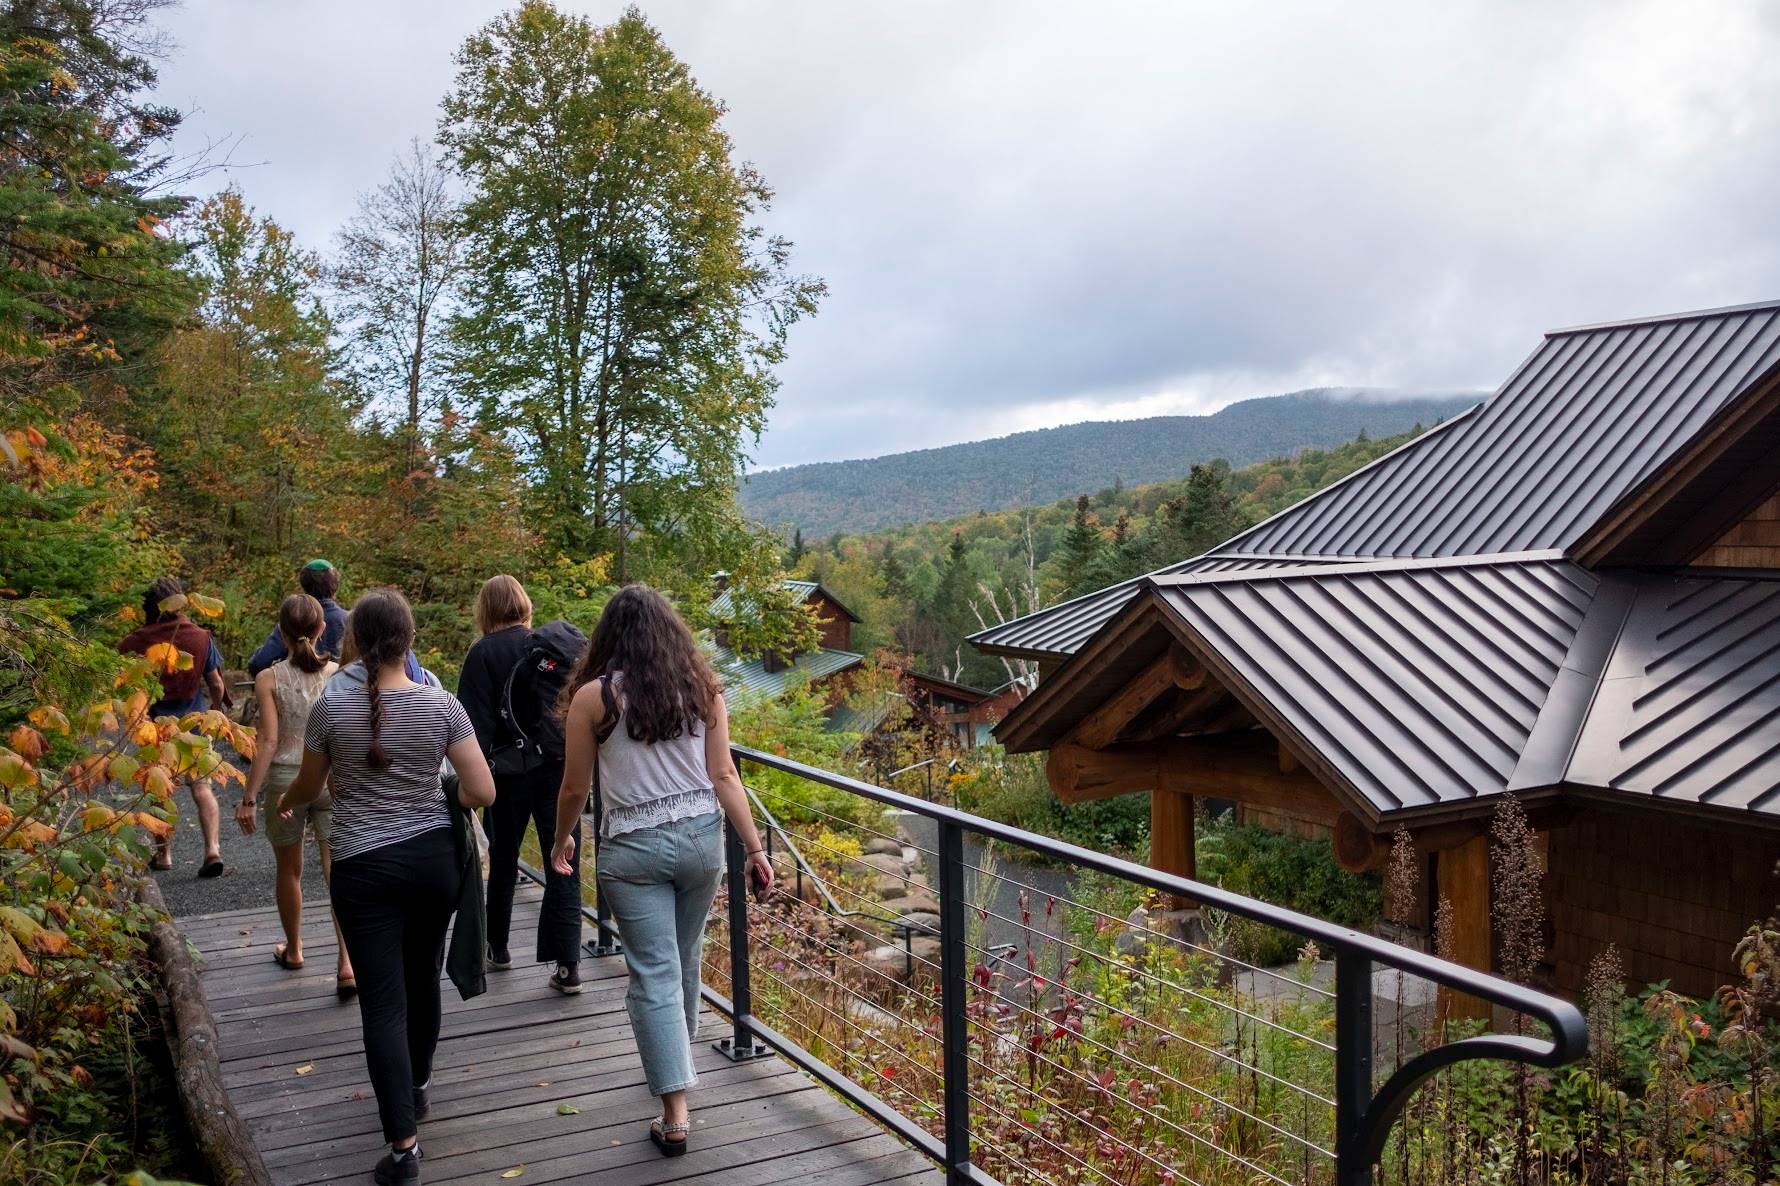 Students walk down the path to the Lodge. The plants are lush and the mountain ridge is in the distance.